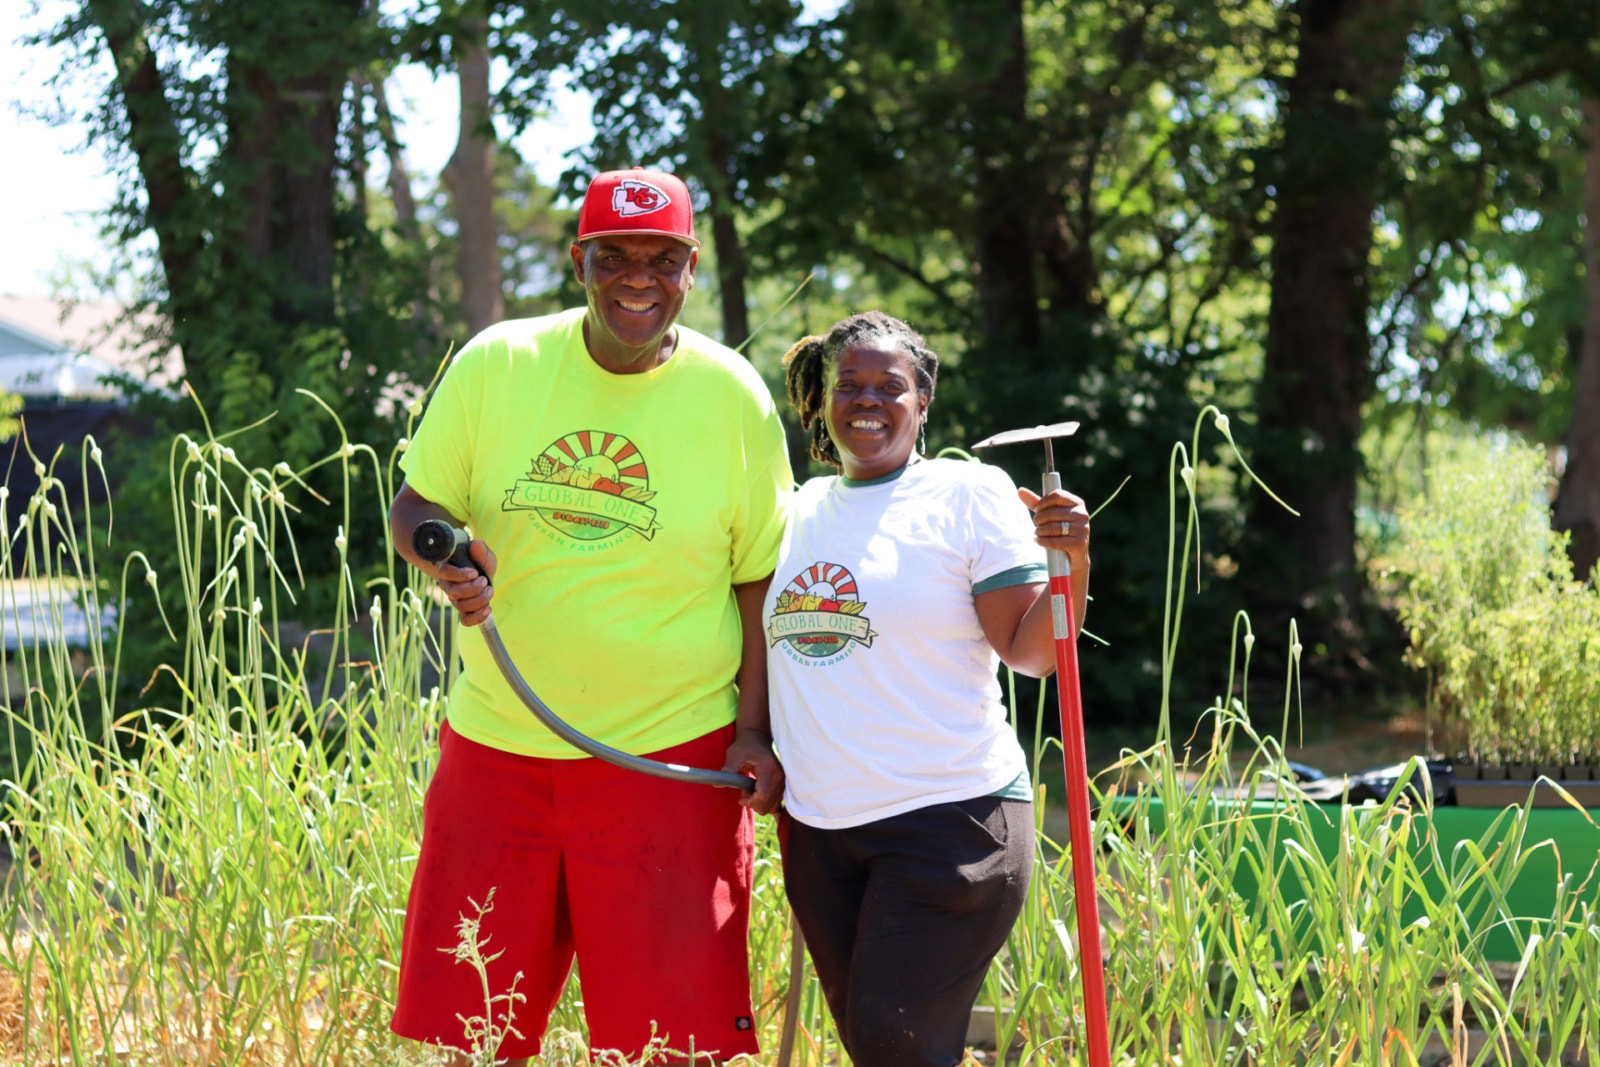 a man in a red hat, yellow shirt and red shorts holds up a garden hose and stands in front of a bed of garlic plants, next to a woman in a white shirt and black pants who holds up a garden hoe. Both of their shirts read "Global One urban farming"